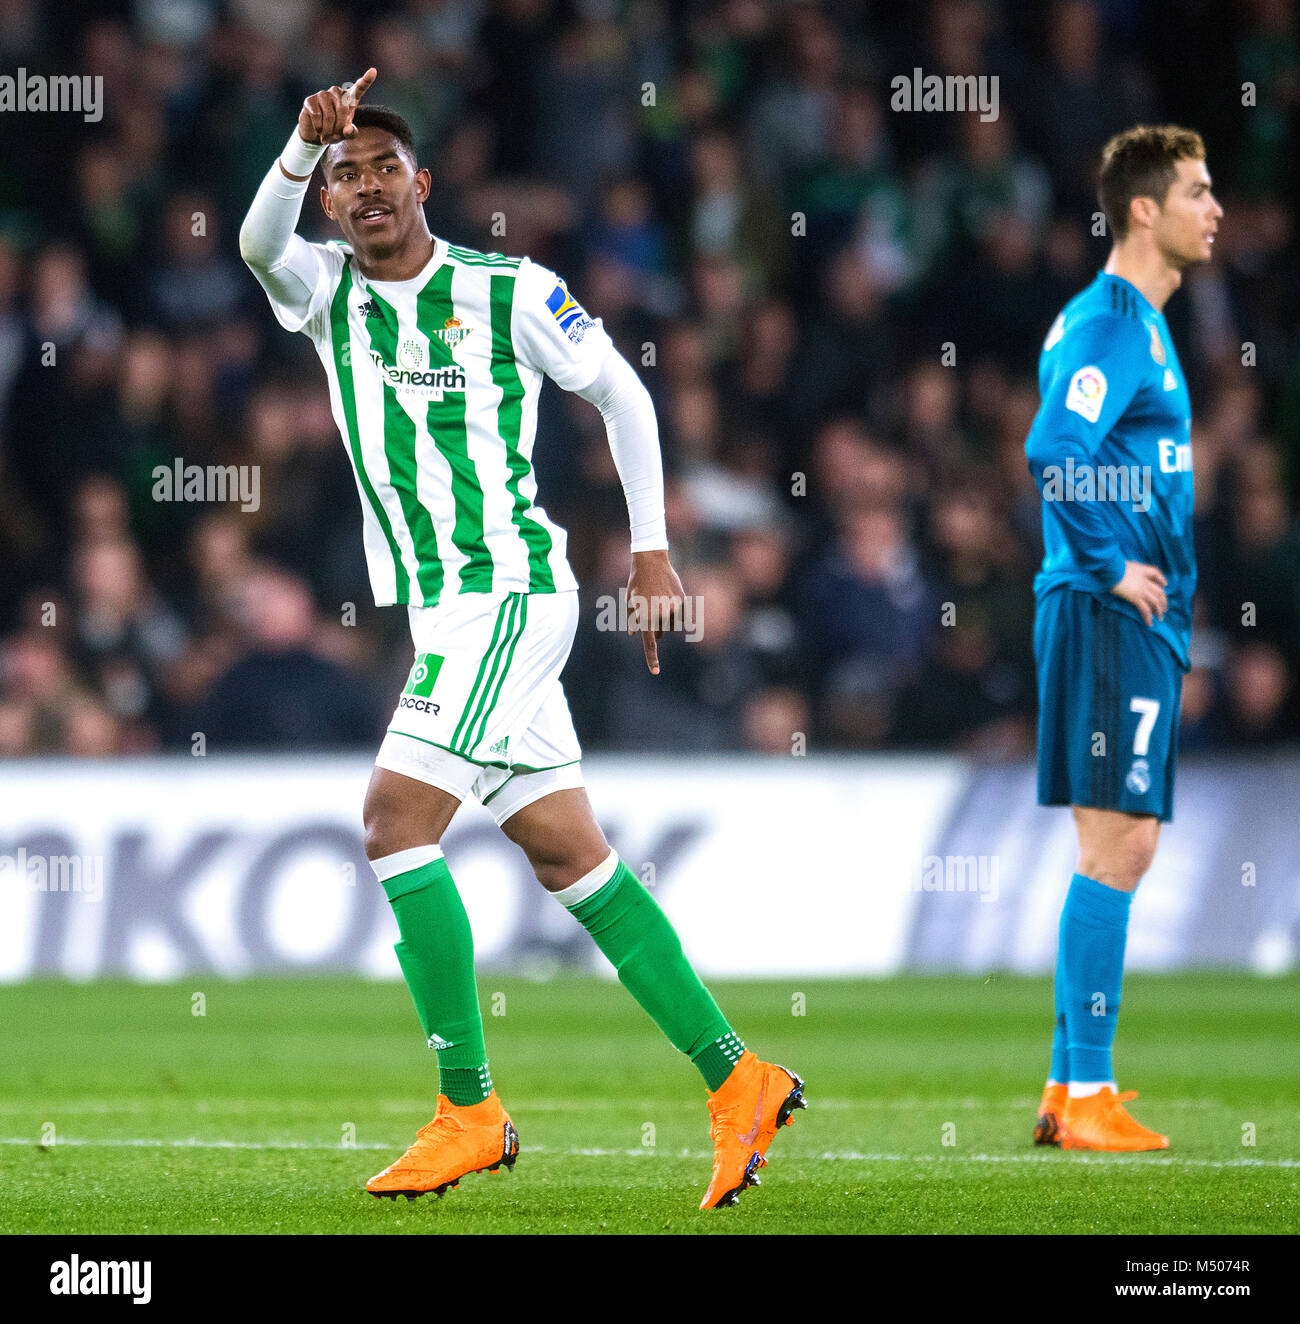 Seville, Spain. 19th Feb, 2018. Junior Firpo during the Spanish LaLiga soccer match between Real Betis and Real Madrid, played at Benito Villamarin Stadium, in Sevilla, Spain, on Sunday, February 18, 2018. Credit: Gtres Información más Comuniación on line, S.L./Alamy Live News Stock Photo